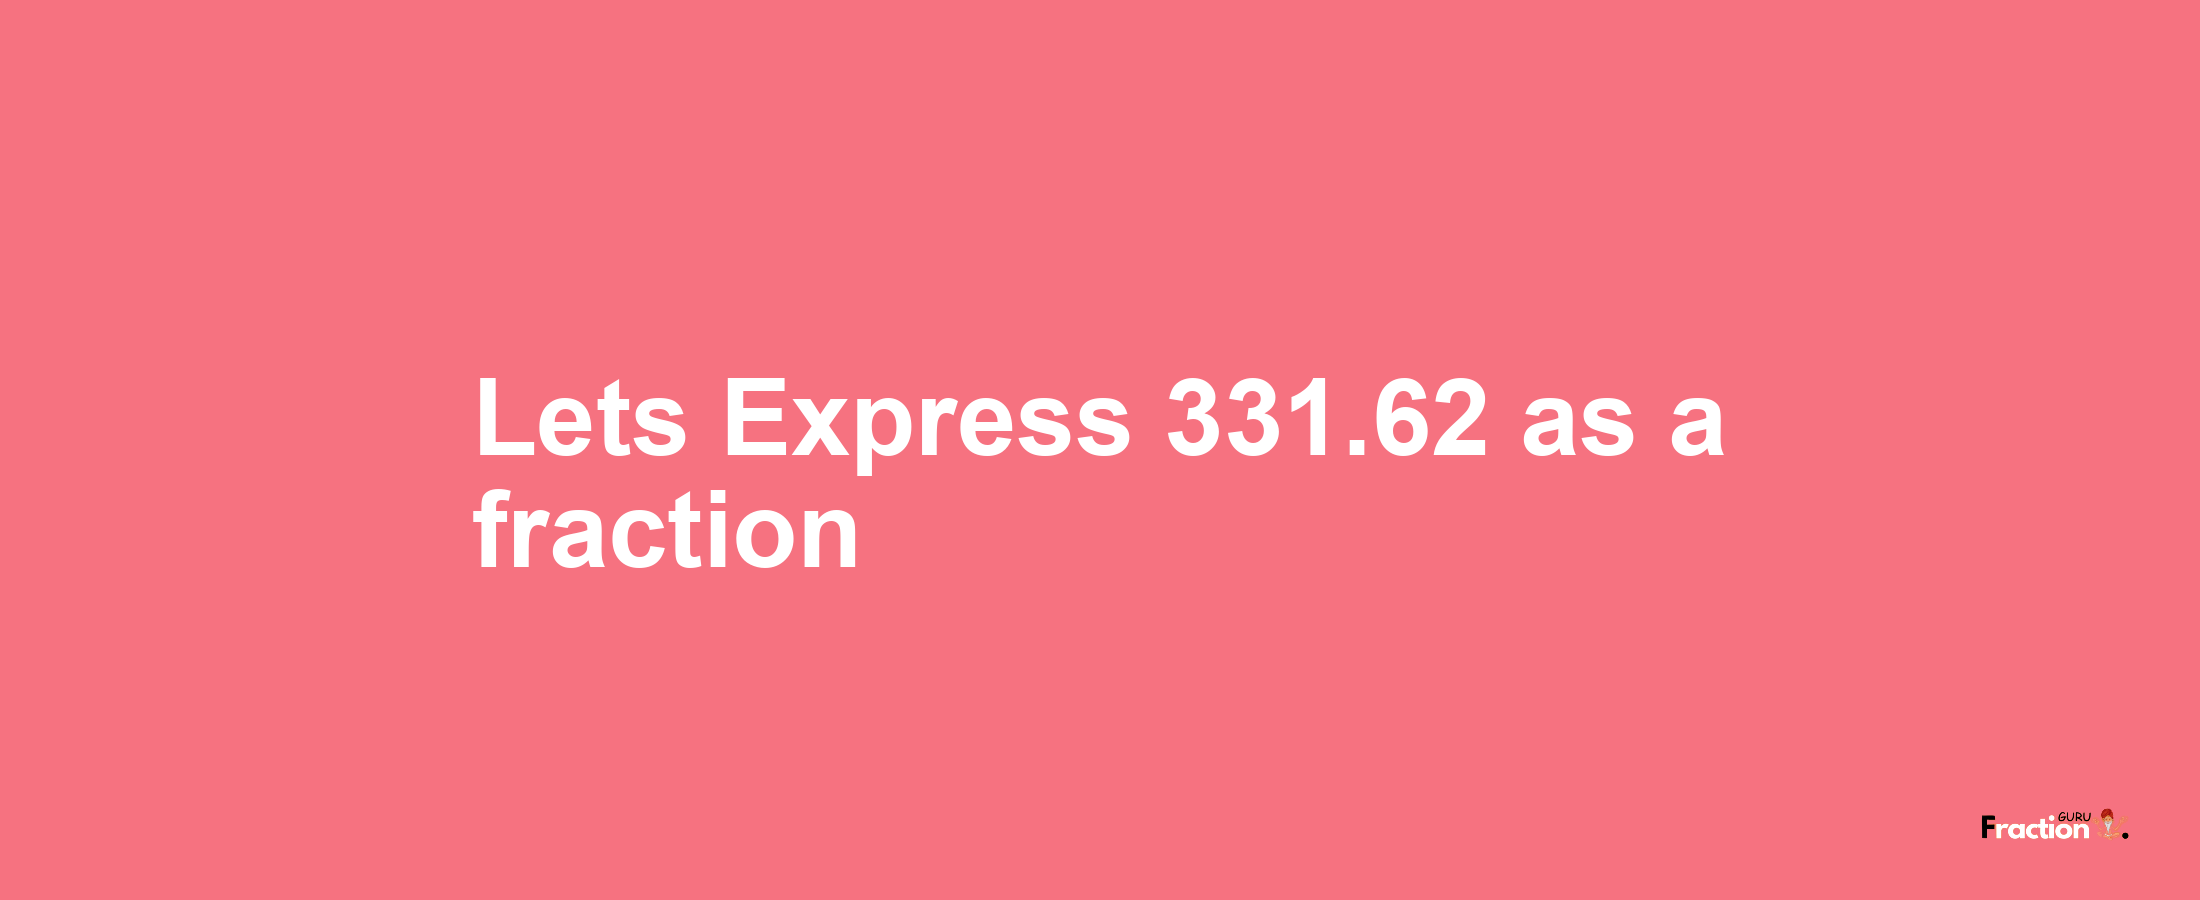 Lets Express 331.62 as afraction